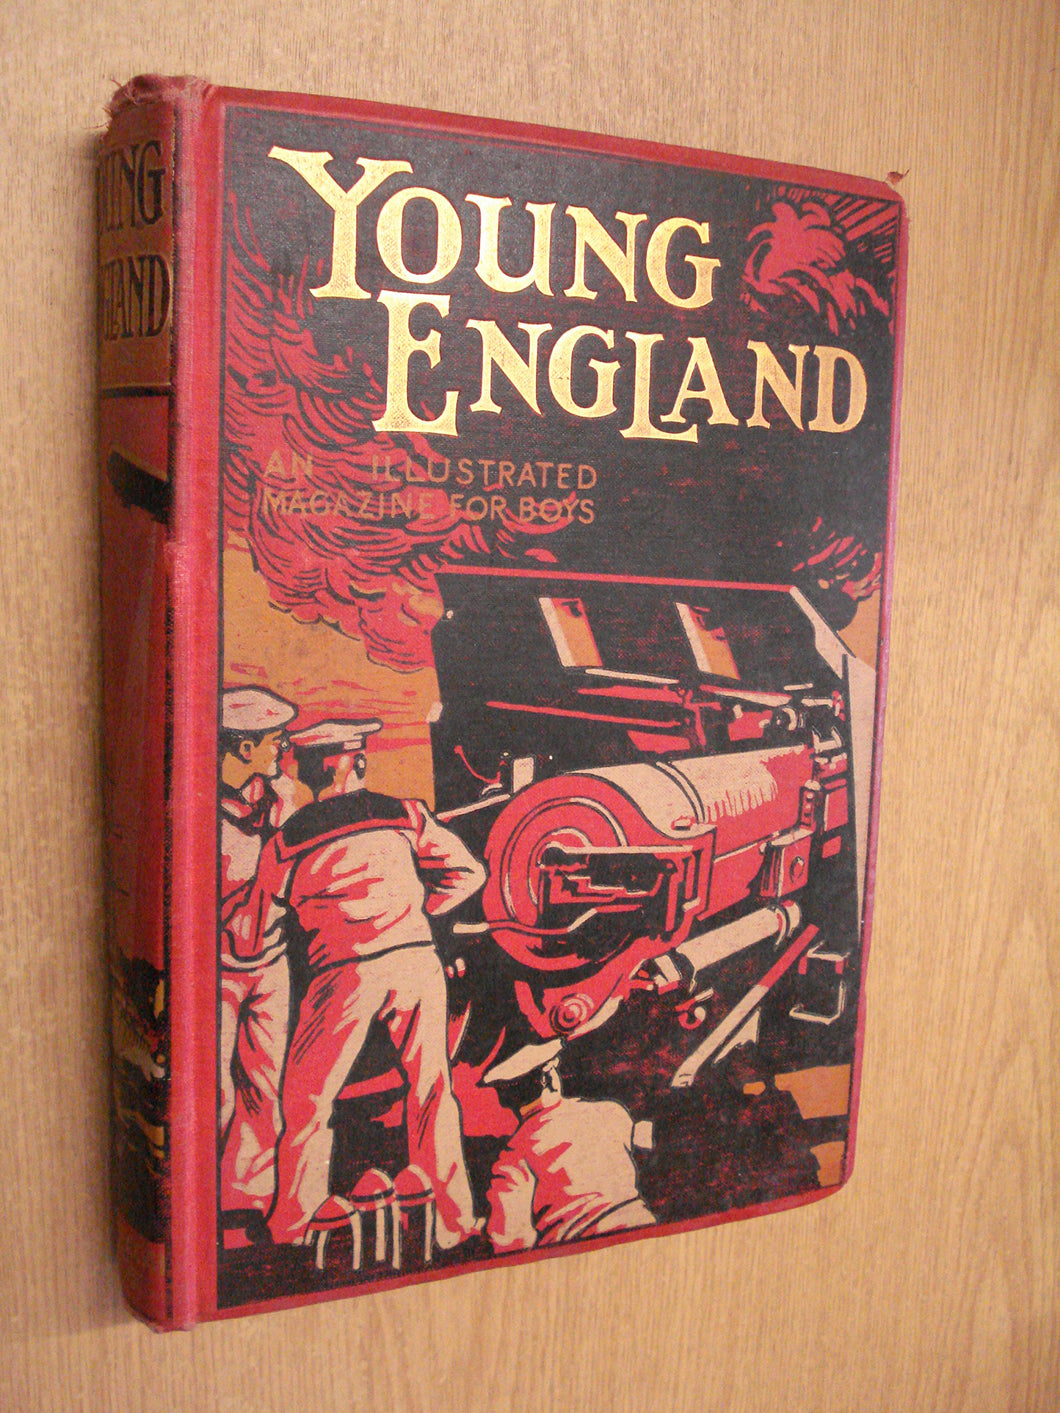 Young England: An Illustrated Magazine For Boys, Thirty-Seventh Annual Volume 1915-16 [Unknown Binding]